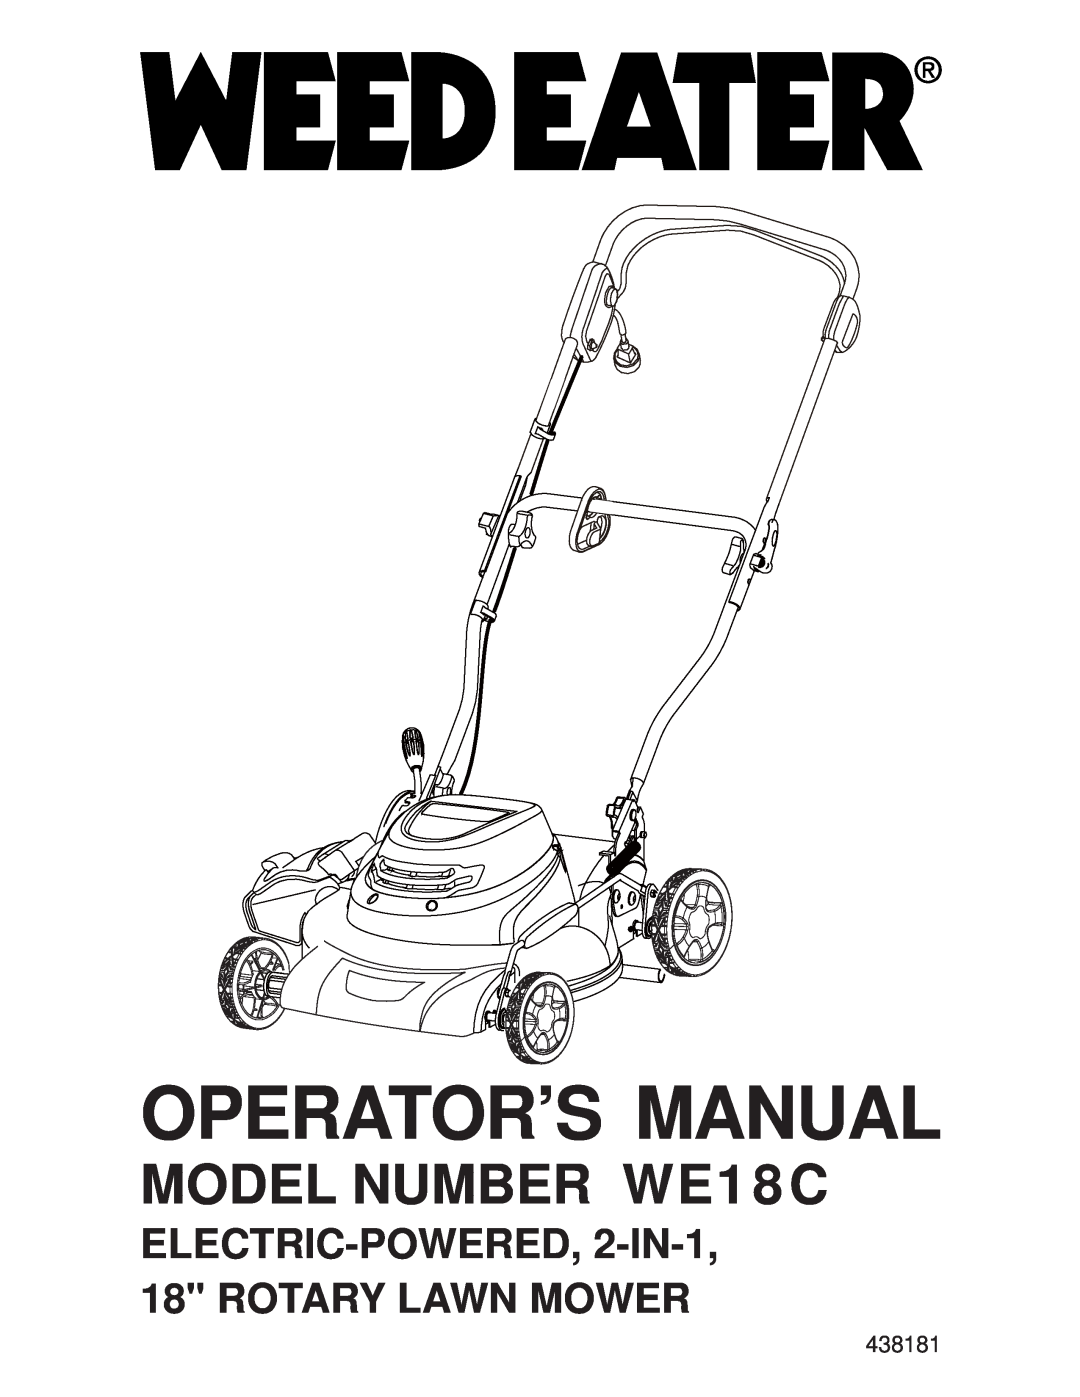 Weed Eater 438181, 96112010100 manual Operator’S Manual, MODEL NUMBER WE18C, ELECTRIC-POWERED, 2-IN-1 18 ROTARY LAWN MOWER 